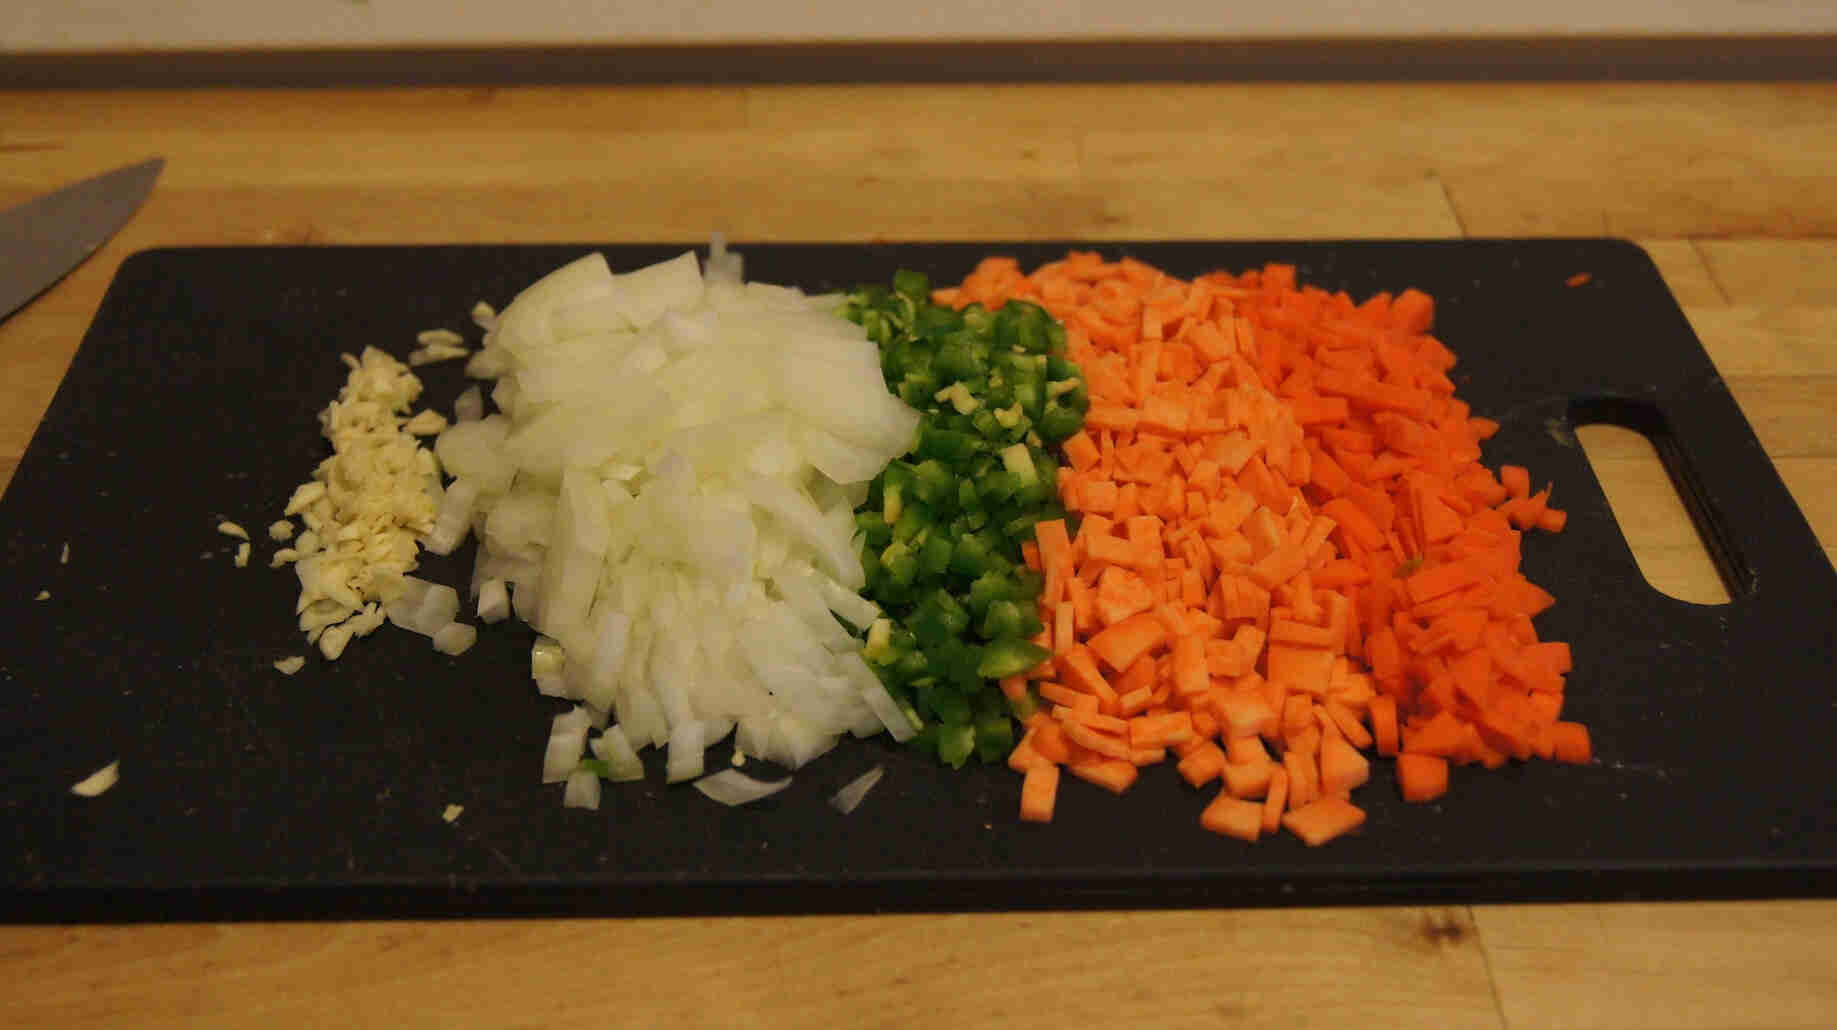 A black cutting board with diced vegetables, on top of a wood countertop